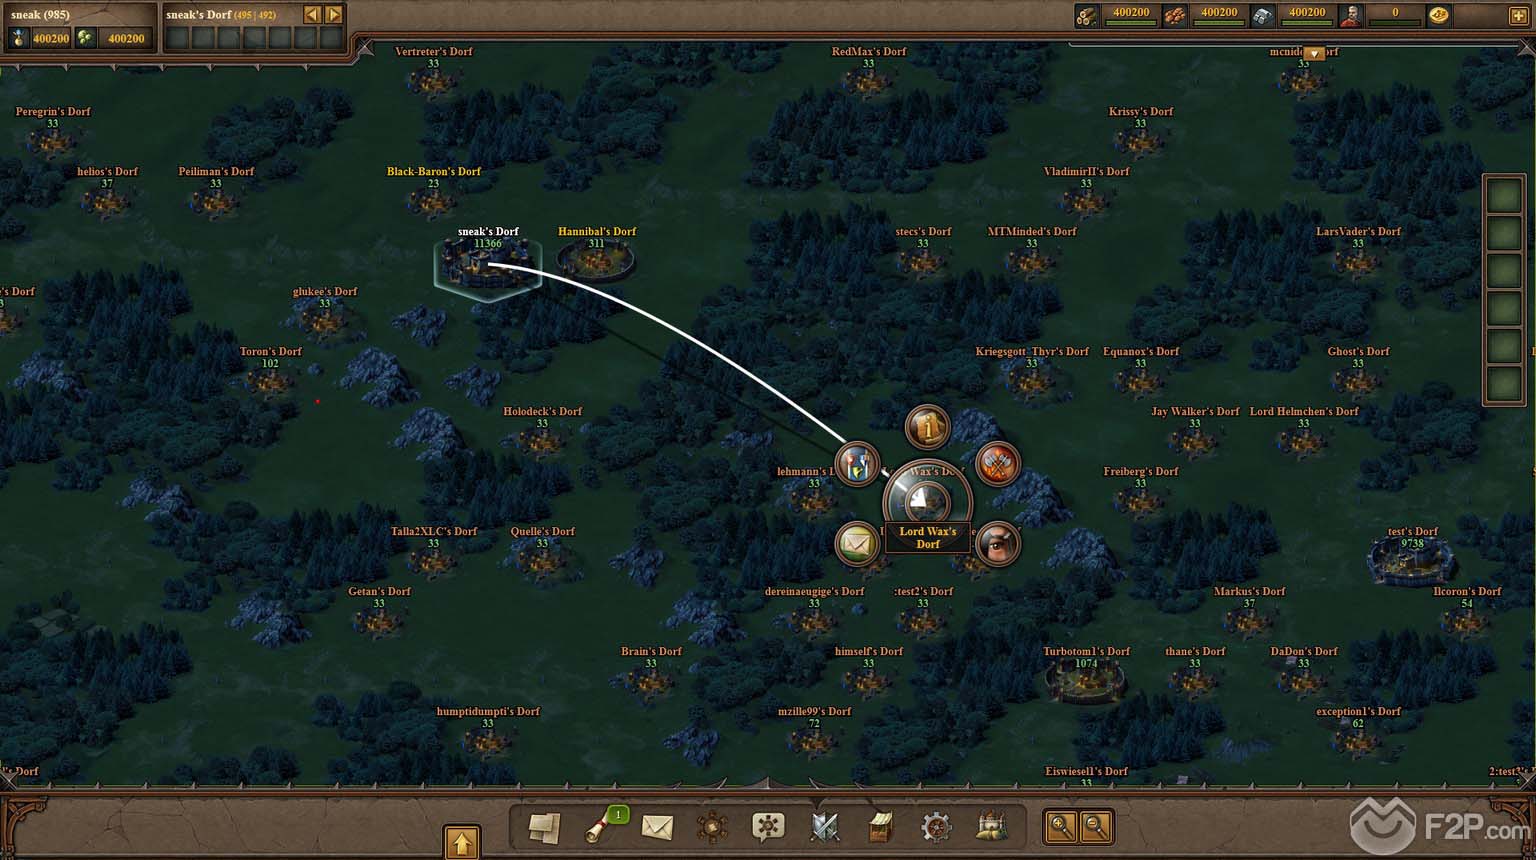 Tribal Wars 2 Review, Medieval Browswer MMORTS Game